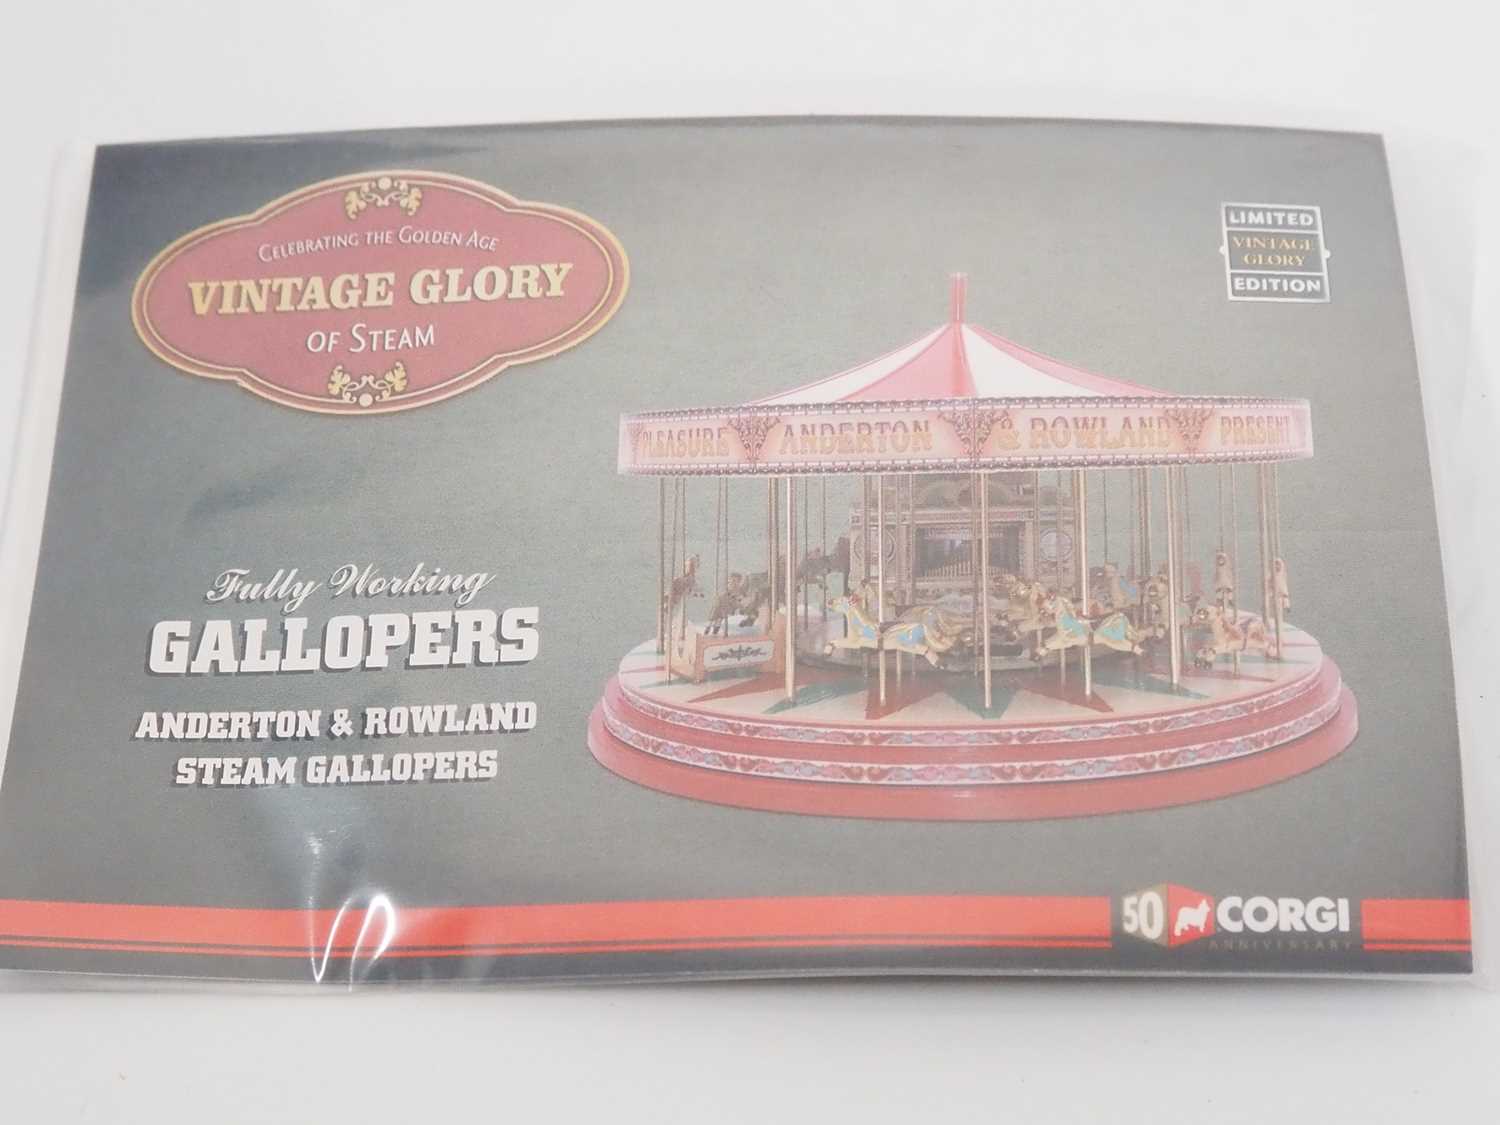 A CORGI 1:50 scale CC20403 Anderton and Rowland Steam Galloper model carousel with horses - - Image 2 of 6